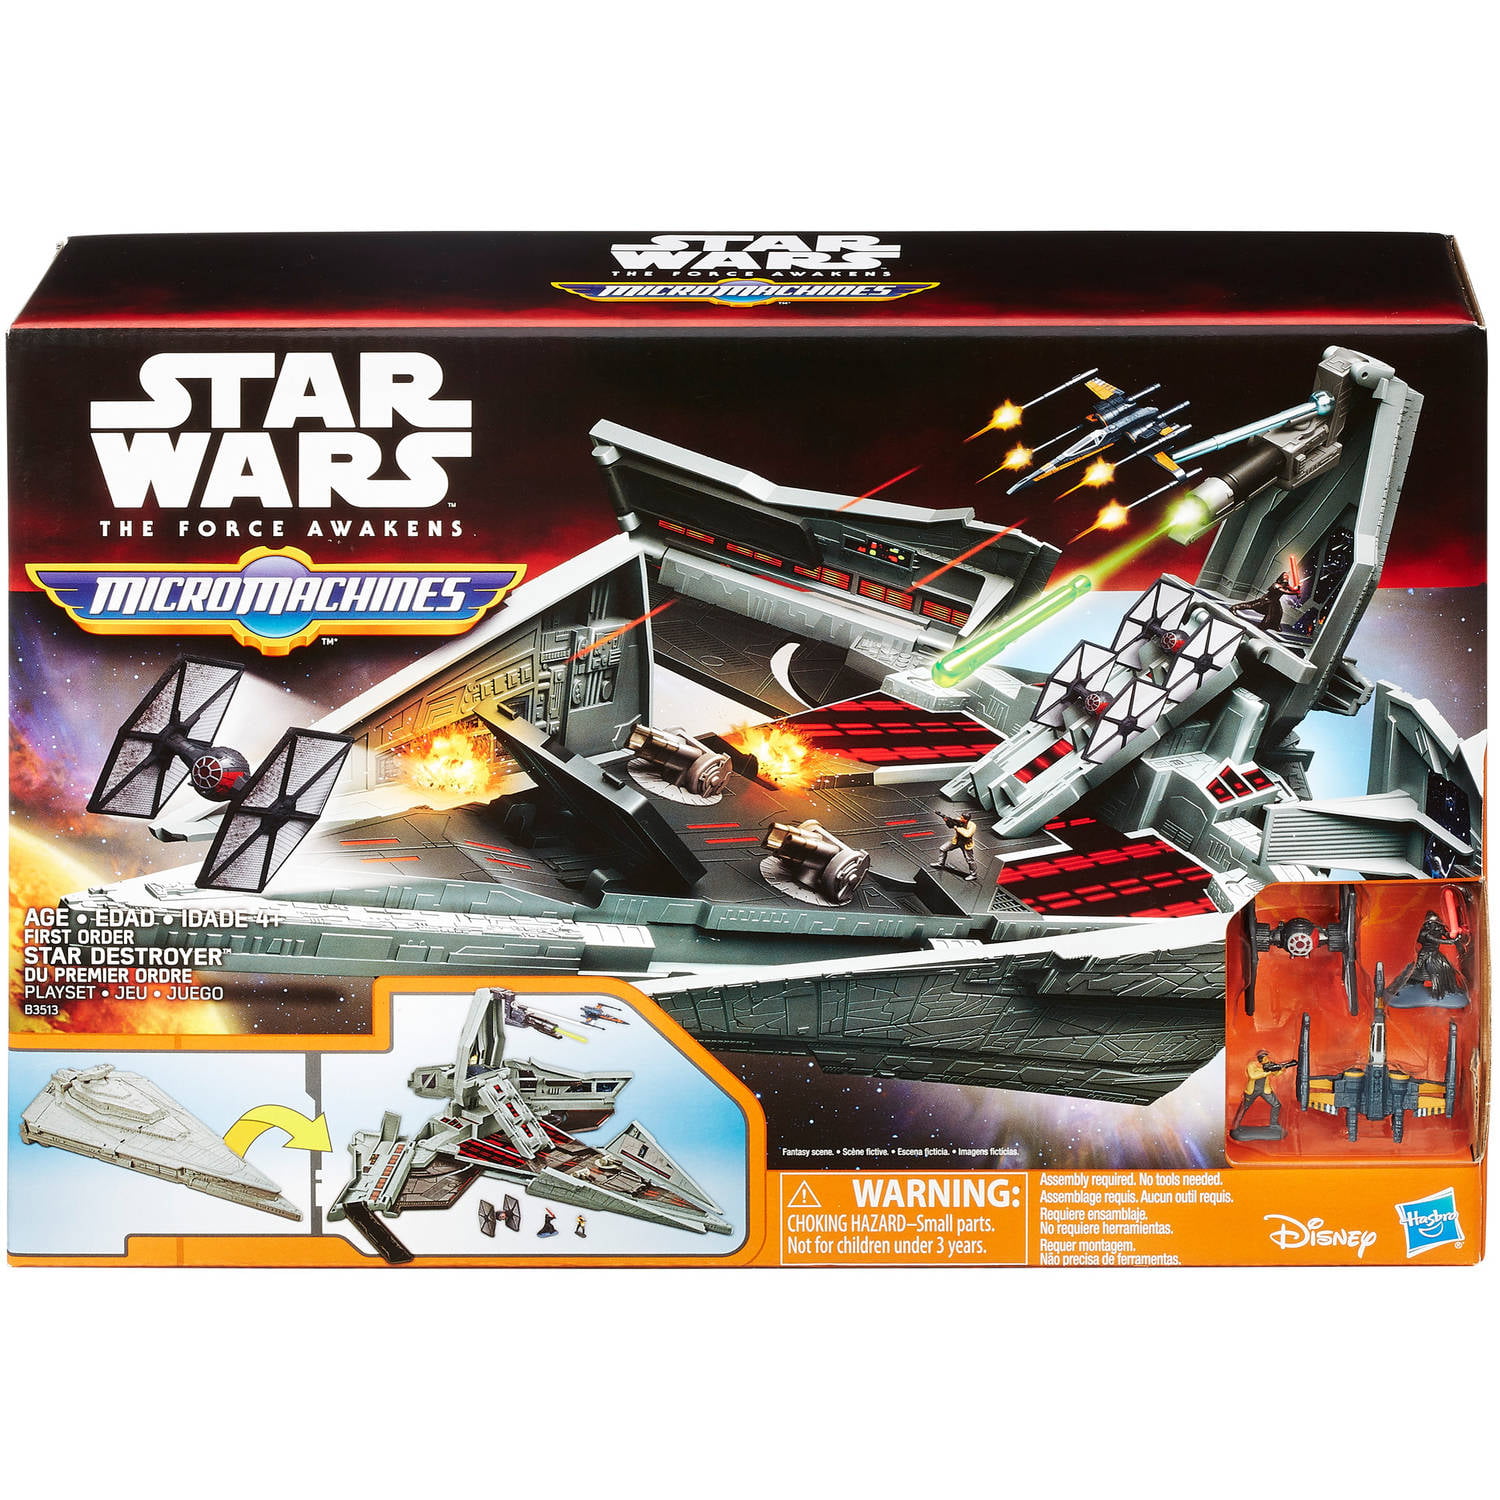 STAR WARS FORCE AWAKENS MICRO MACHINES FIRST ORDER STAR DESTROYER micromachines